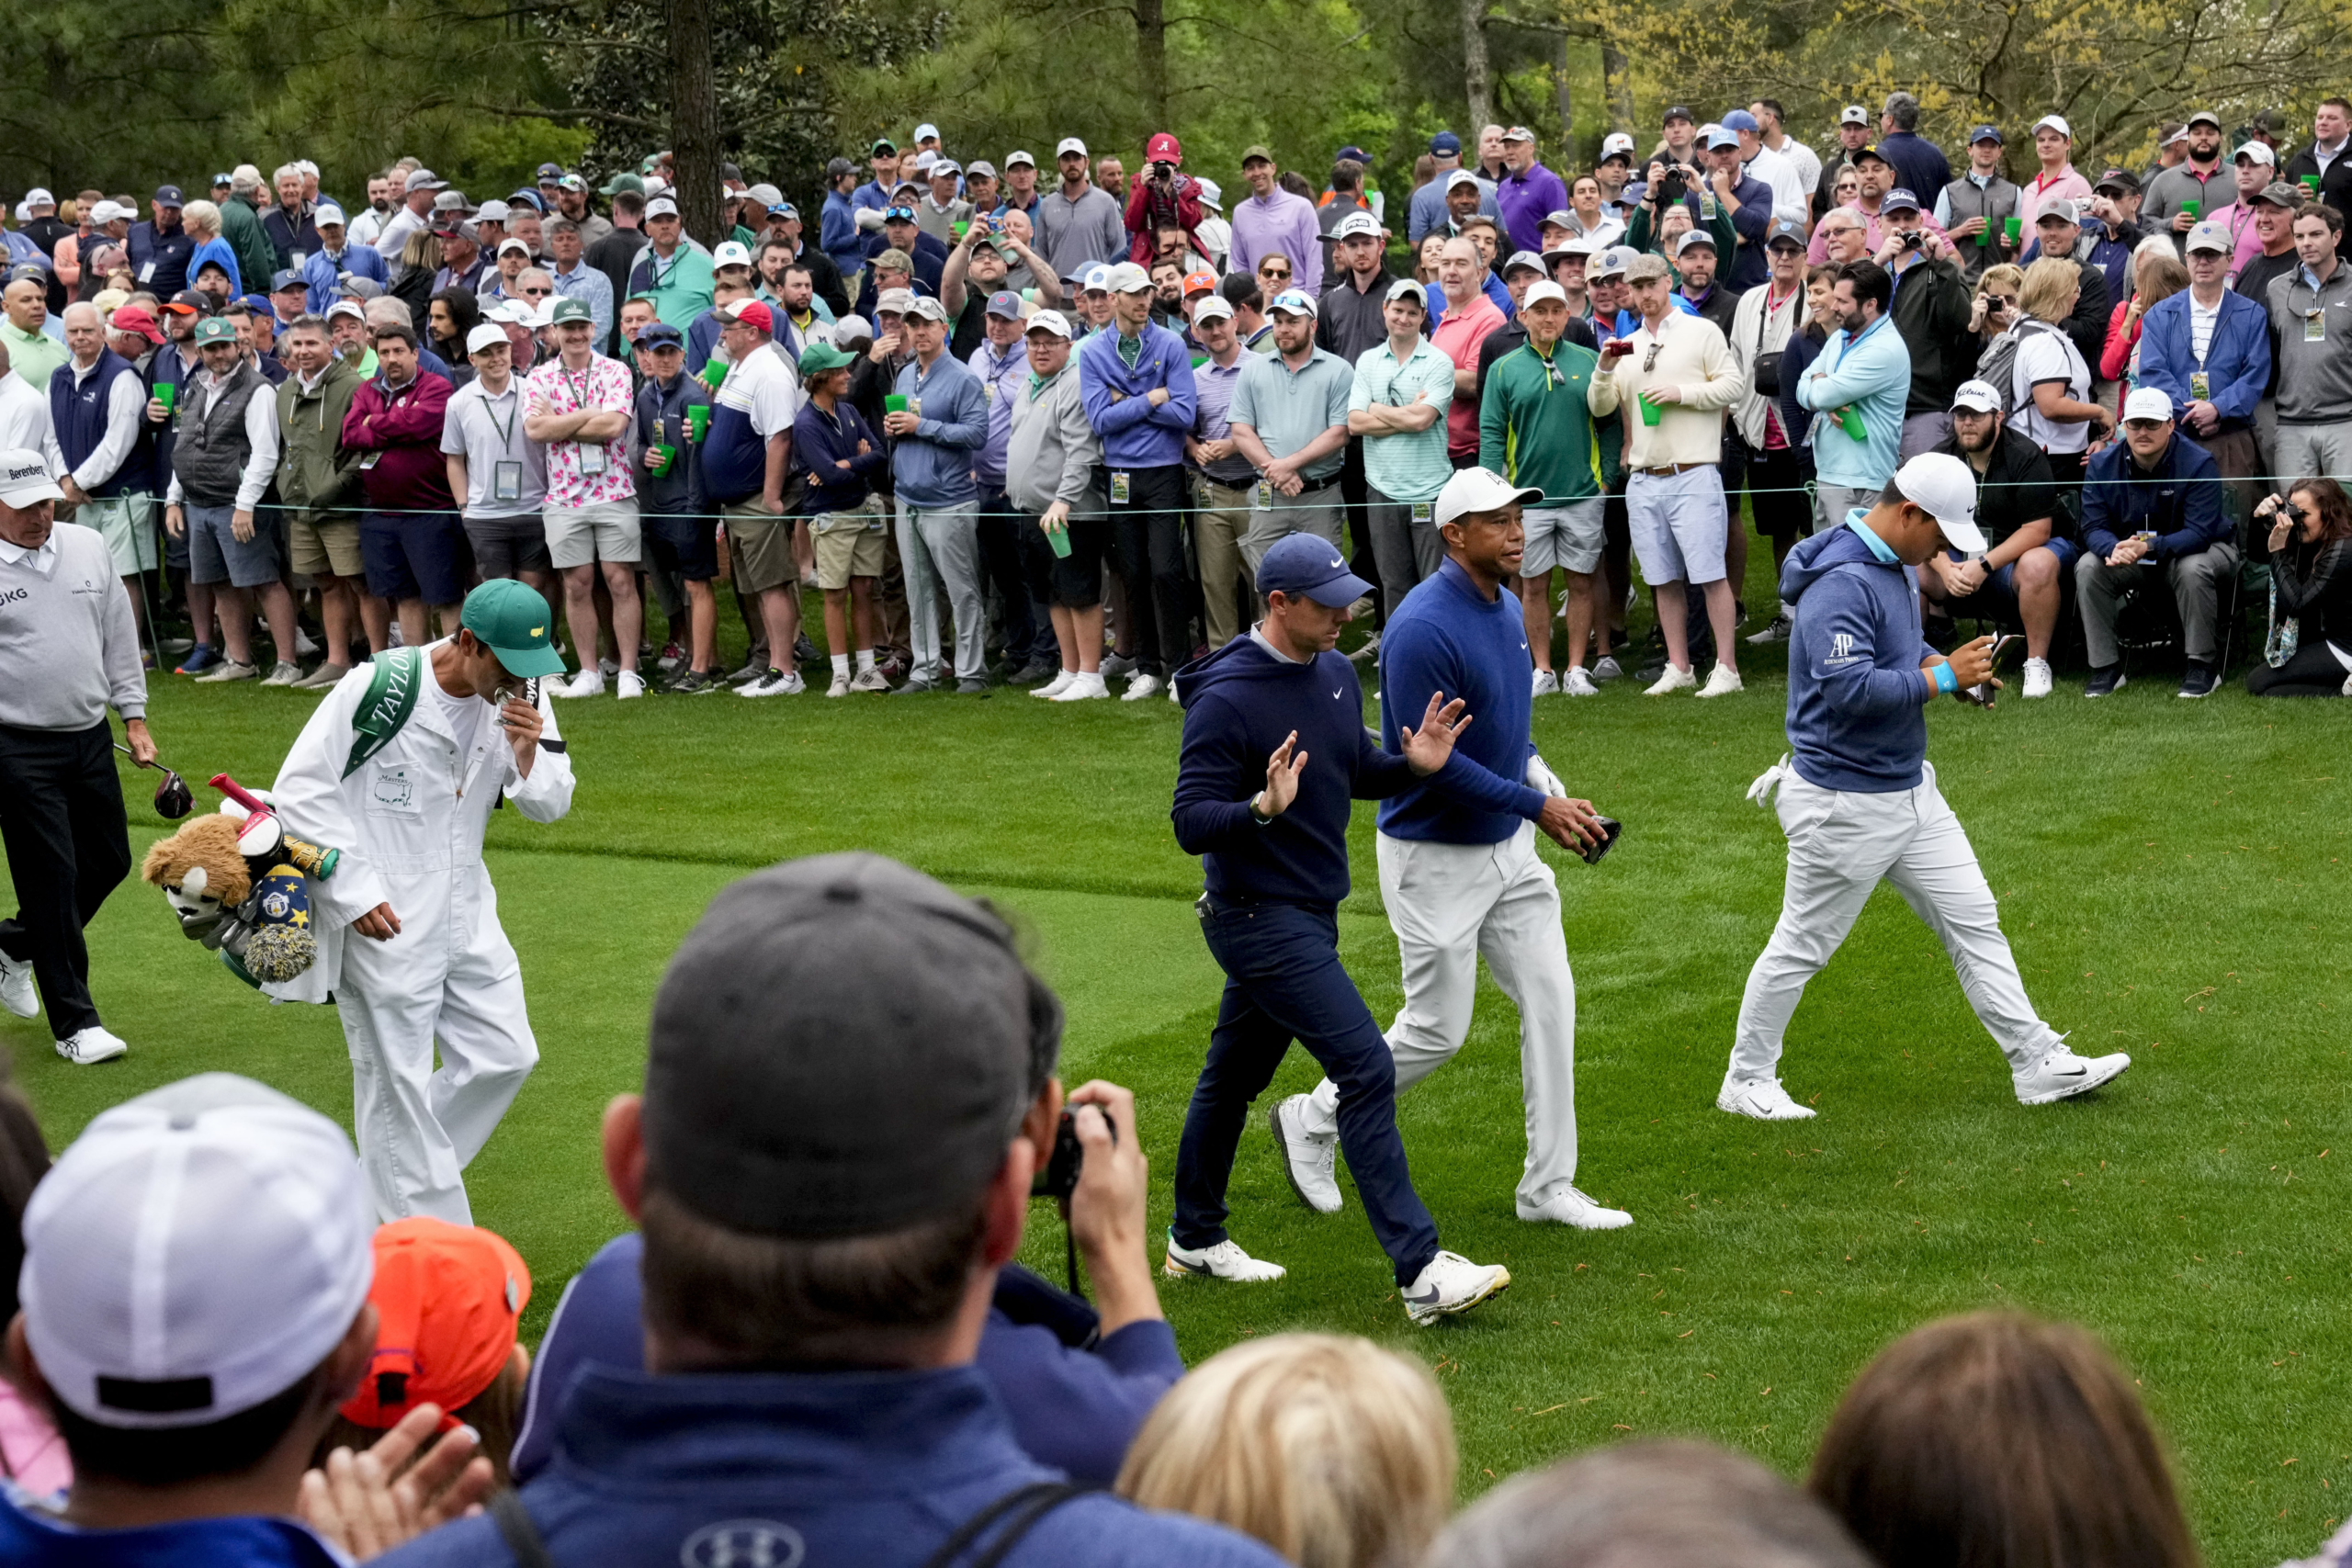 Everything to know about the Masters Tournament